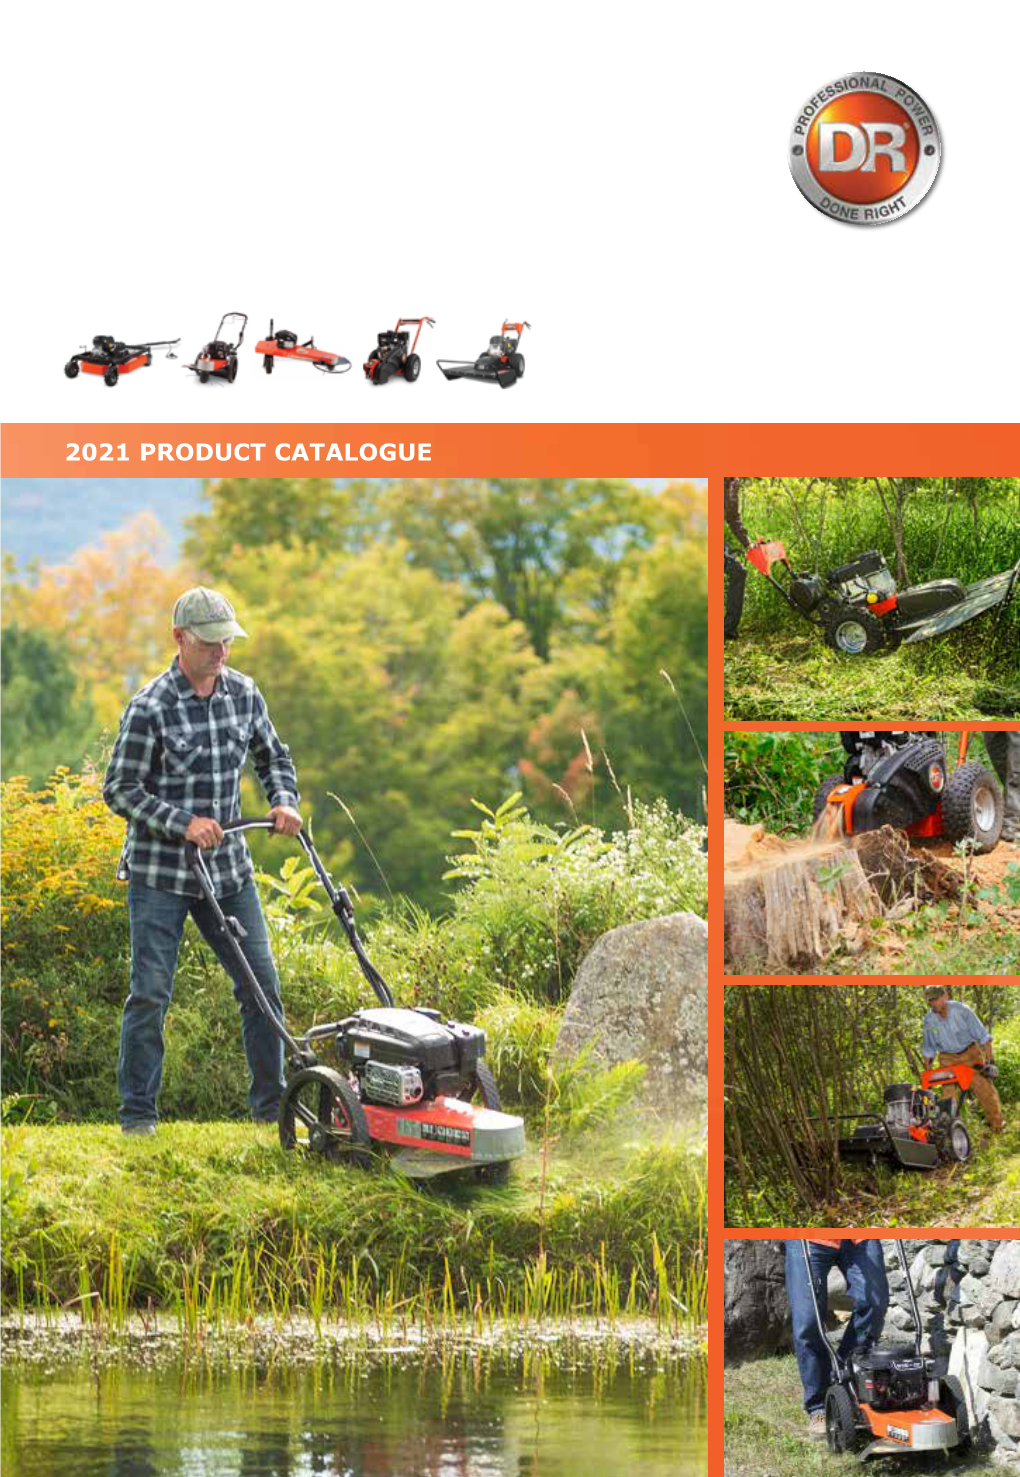 2021 Product Catalogue Dr Powerdr Power Equipment